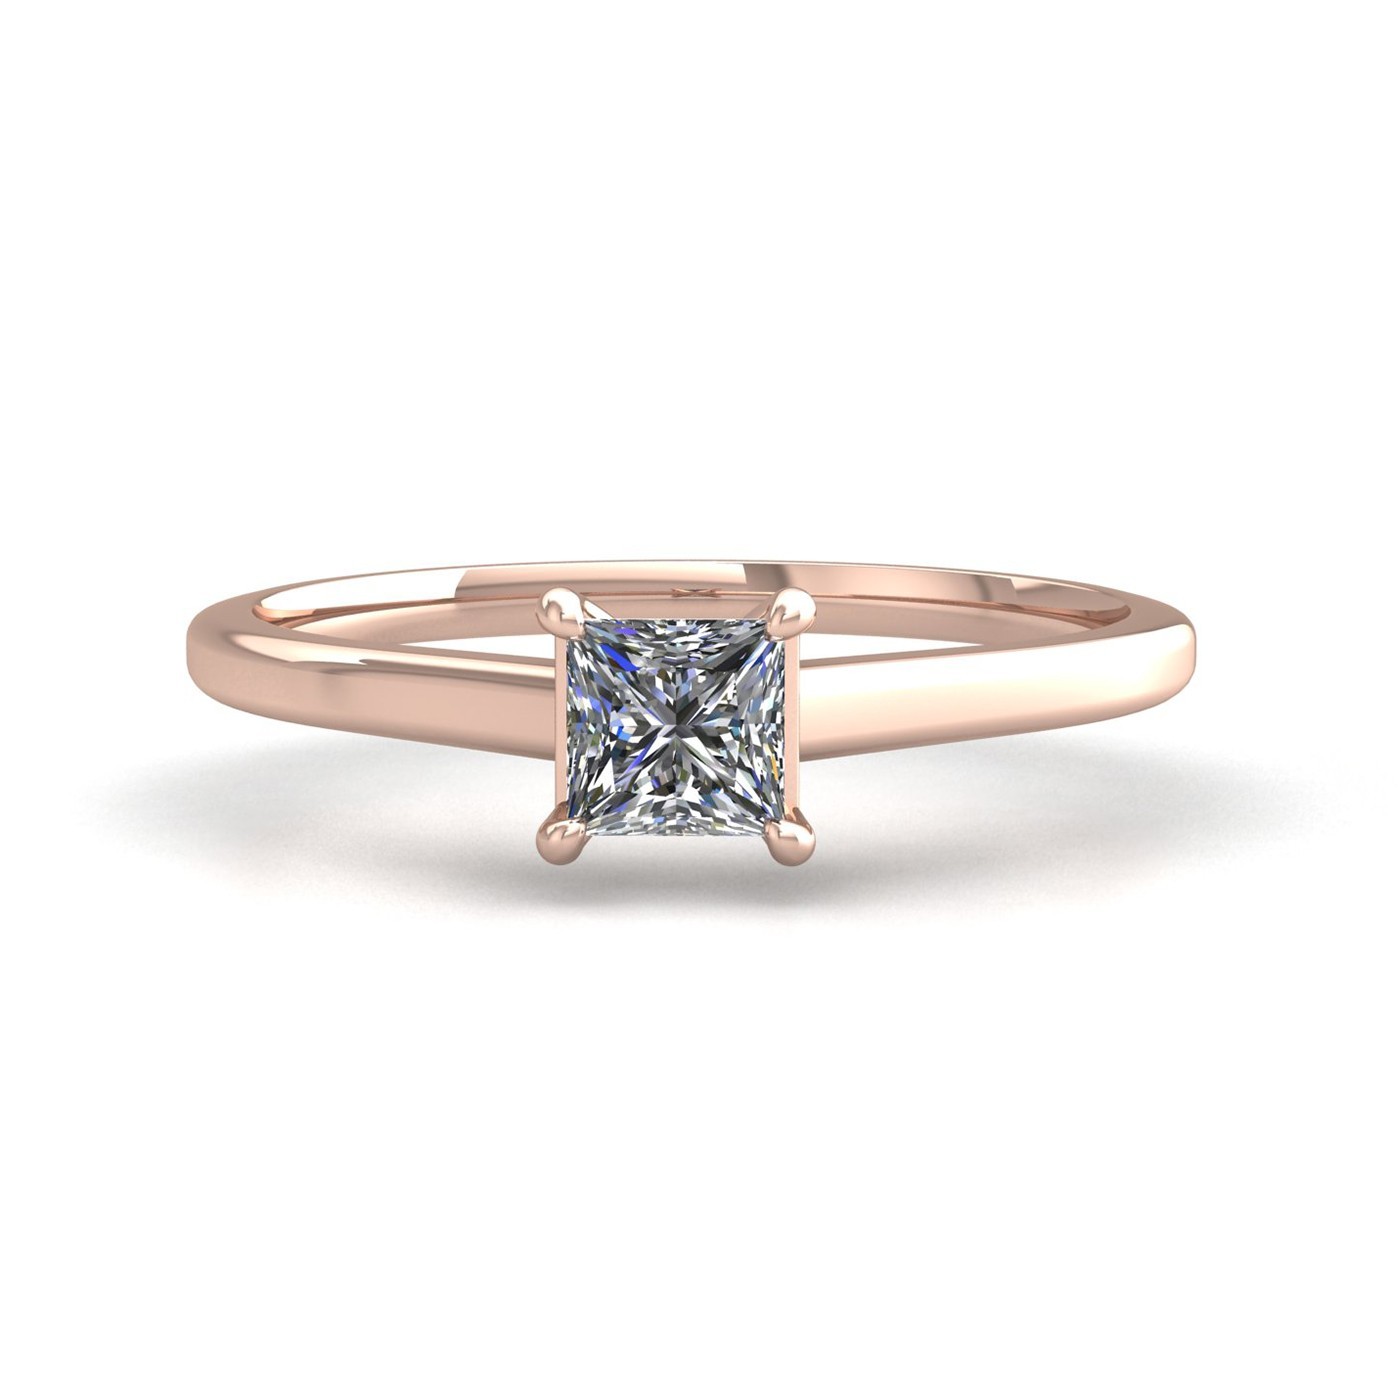 18k rose gold  0,30 ct 4 prongs solitaire princess cut diamond engagement ring with whisper thin band